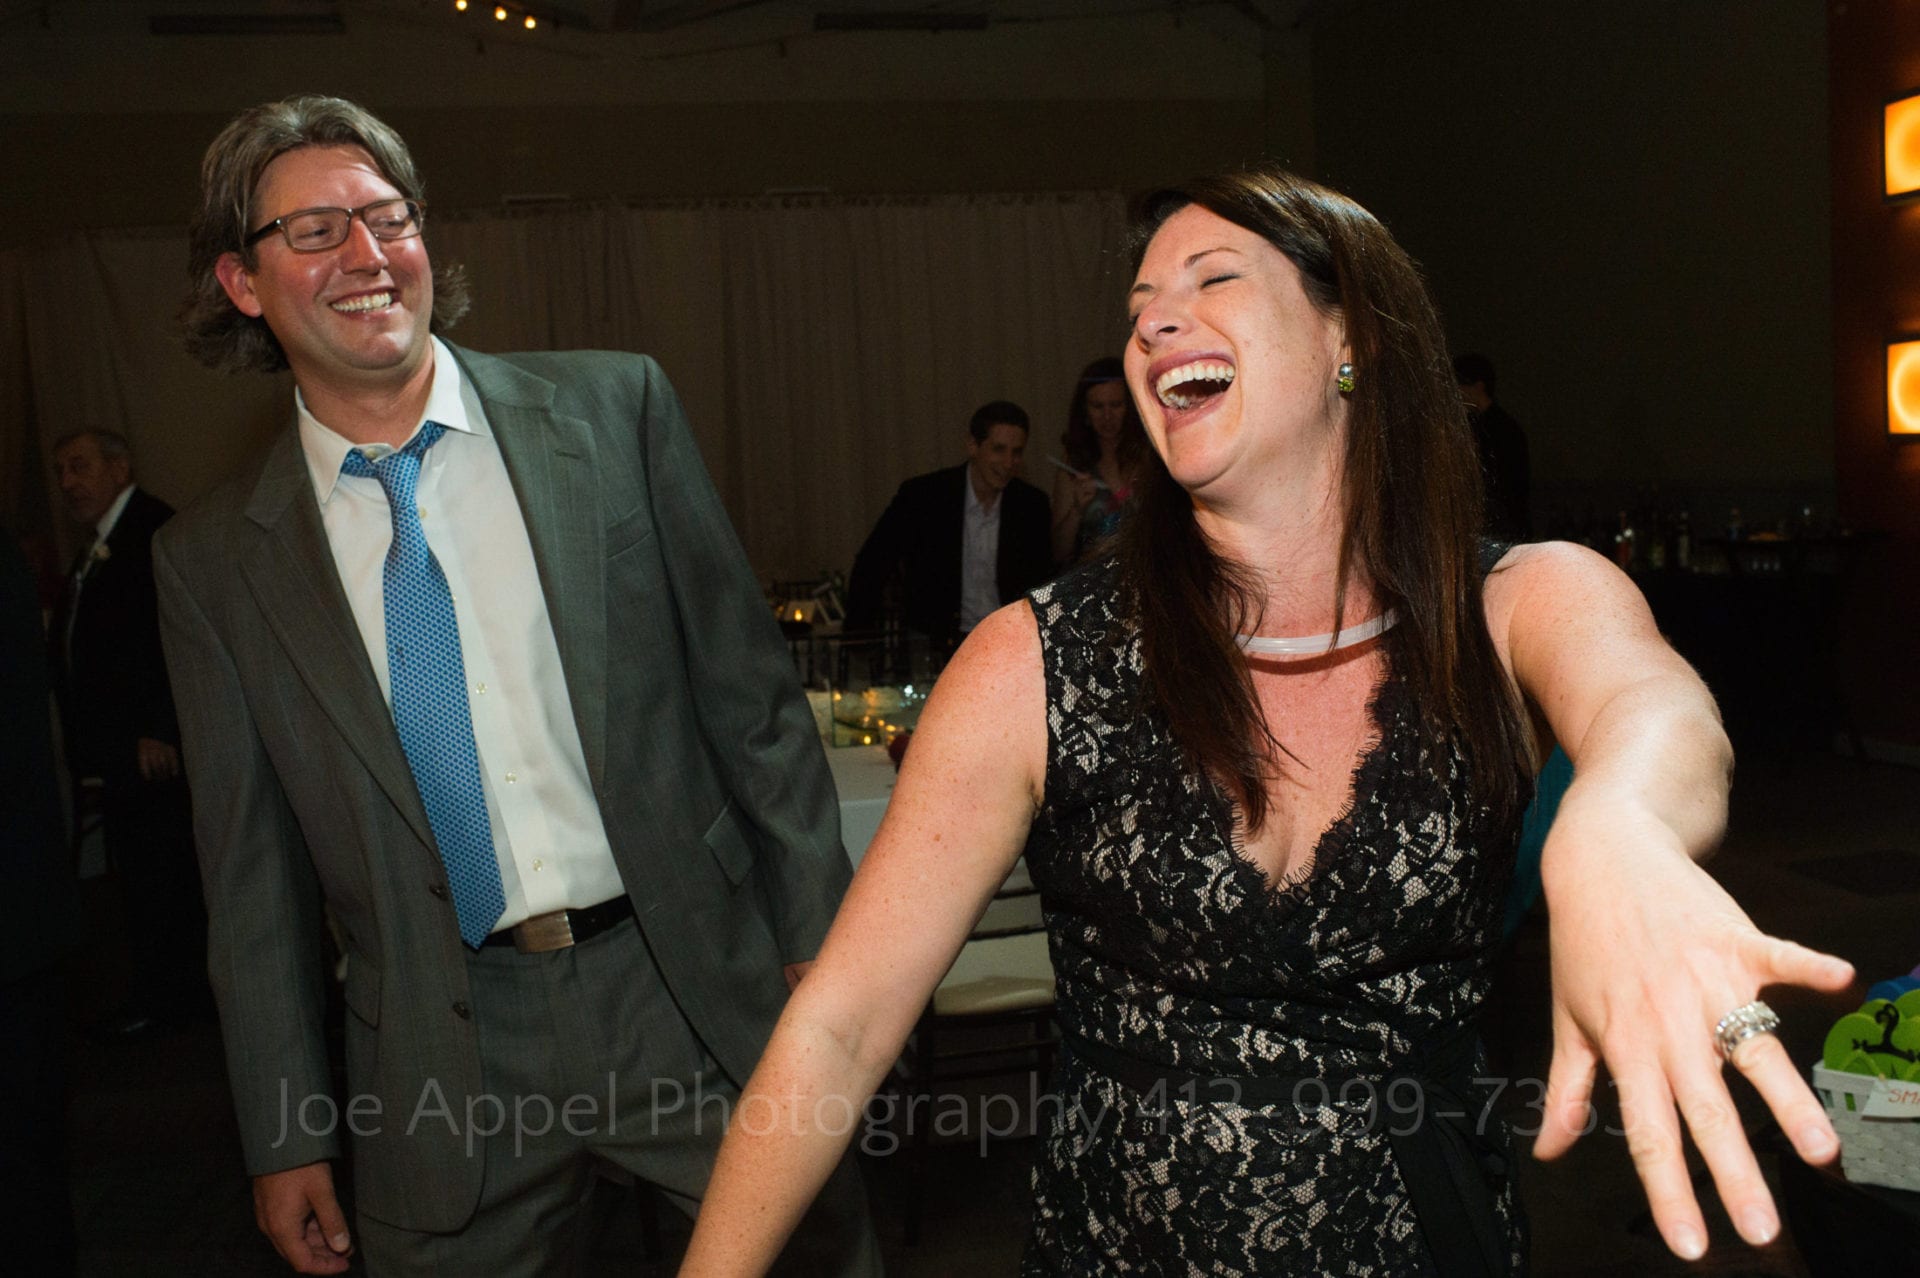 A woman in a black lace dress holds out her hand and laughs while dancing with a man in a gray suit and blue tie.